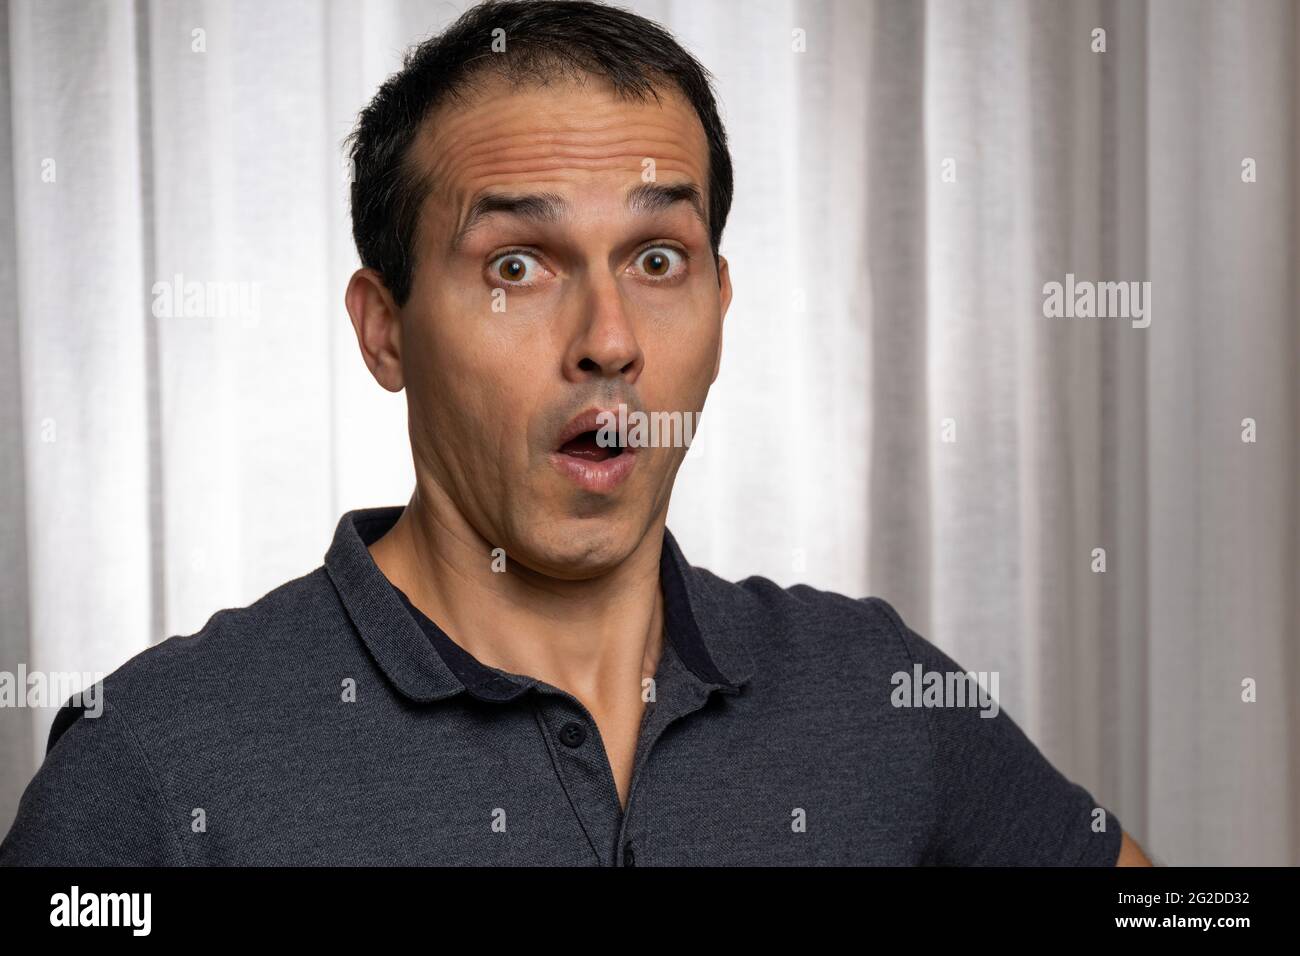 Mature man (44 years old) in photo session with dark blue polo shirt, making several faces. Stock Photo